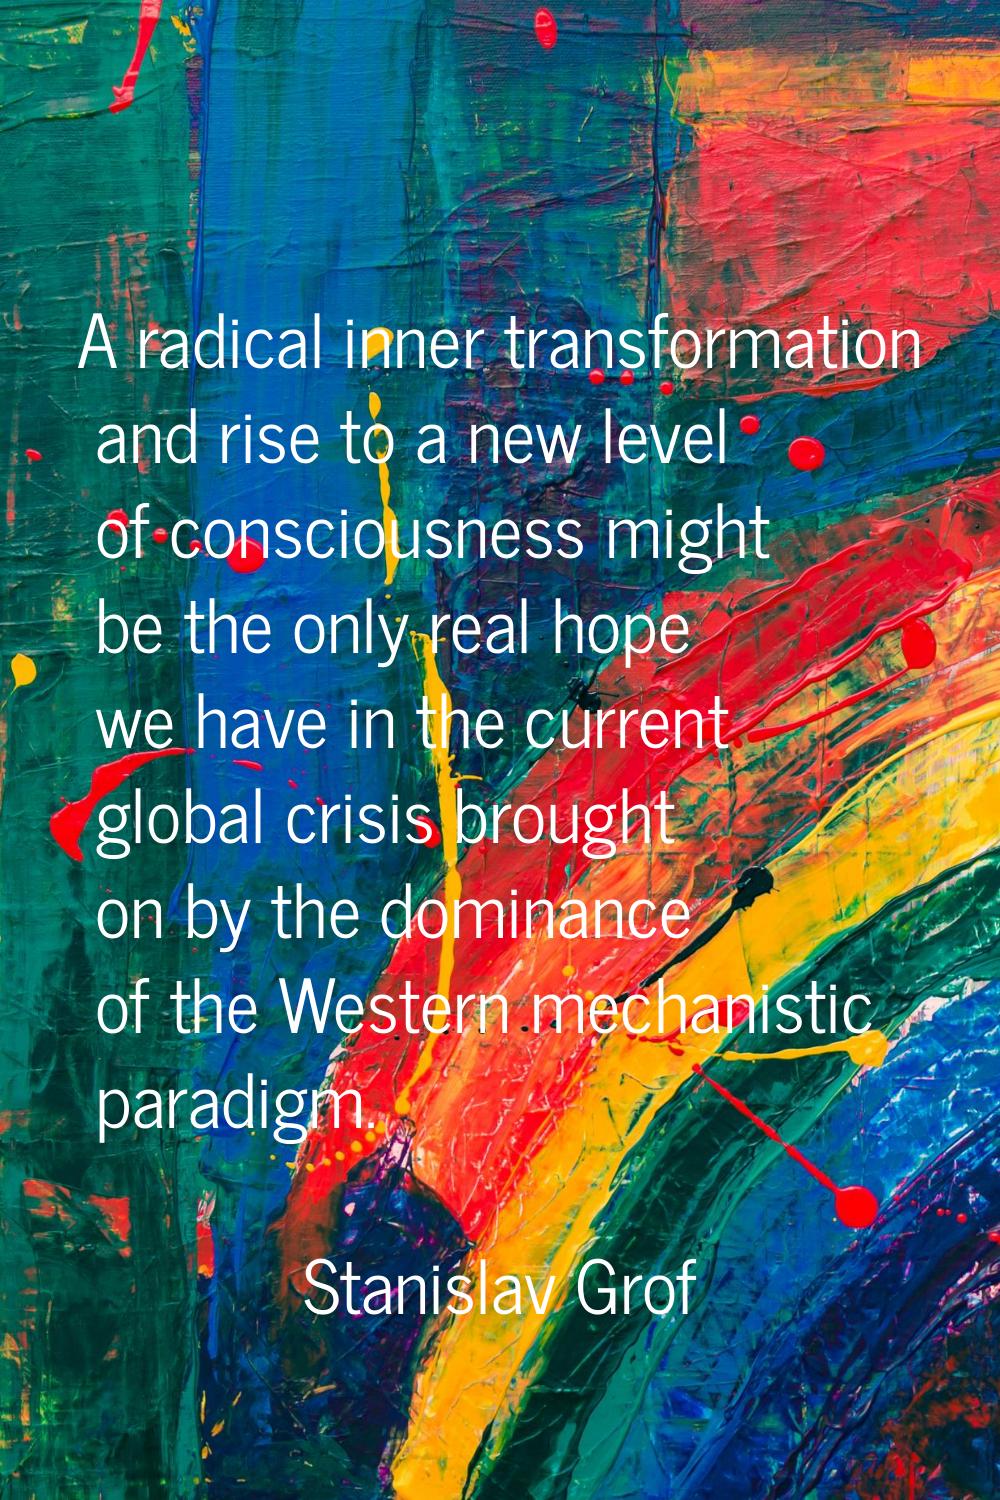 A radical inner transformation and rise to a new level of consciousness might be the only real hope